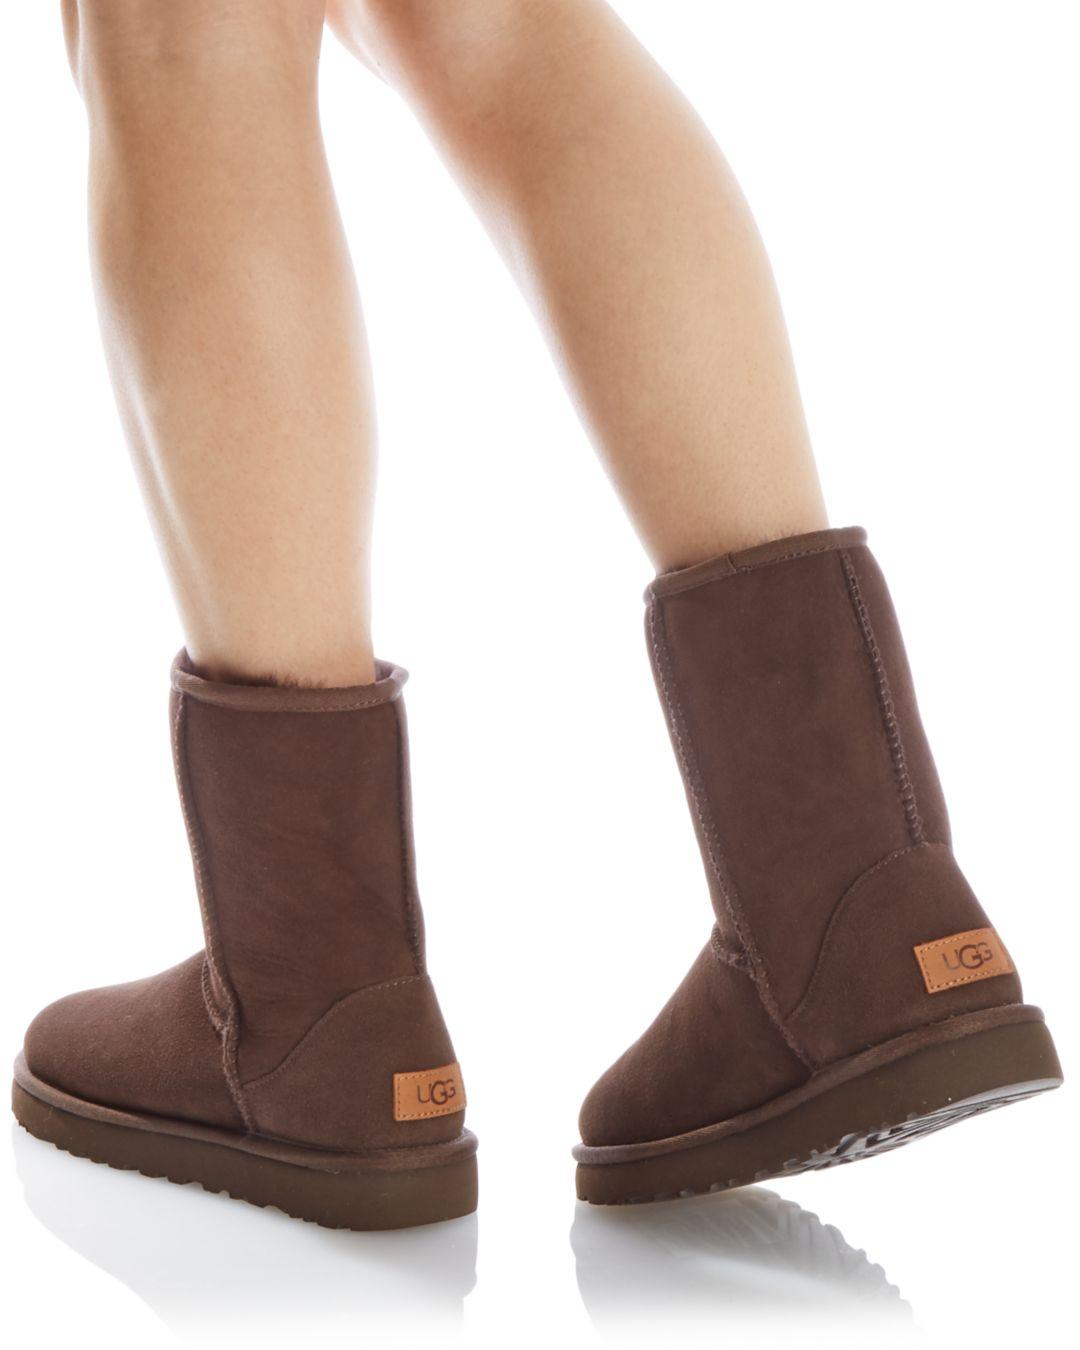 UGG Wool Classic Short Ii Boot in Chocolate (Brown) - Save 42% - Lyst